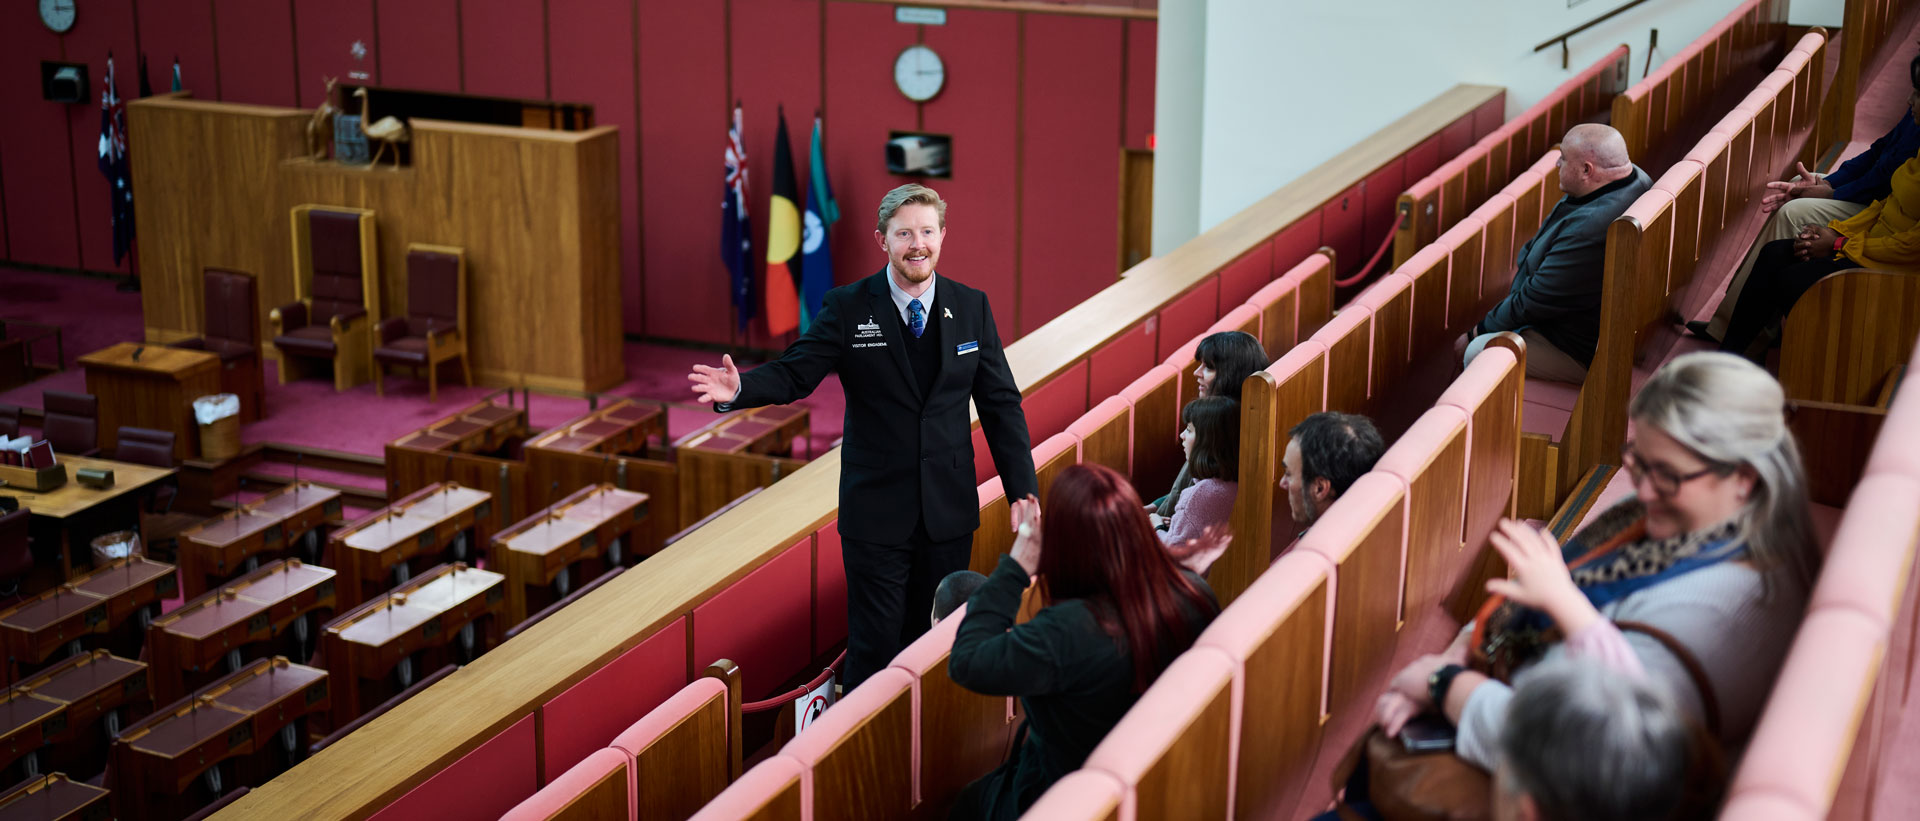 A guide shows visitors features of the Senate Chambers at Parliament House